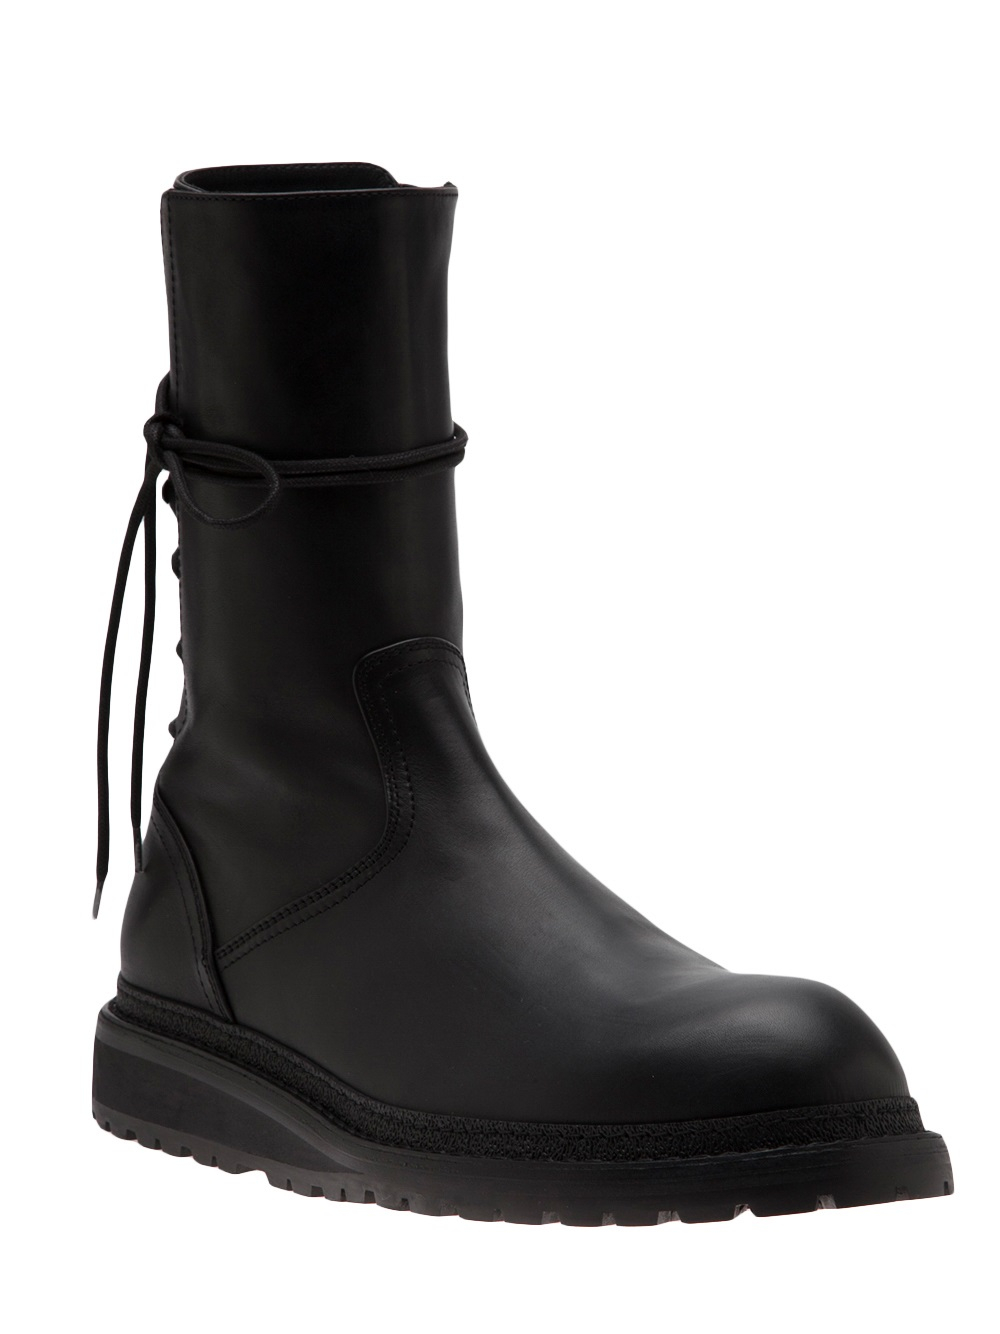 Ann Demeulemeester Back Lace Up Boot in Black for Men - Lyst